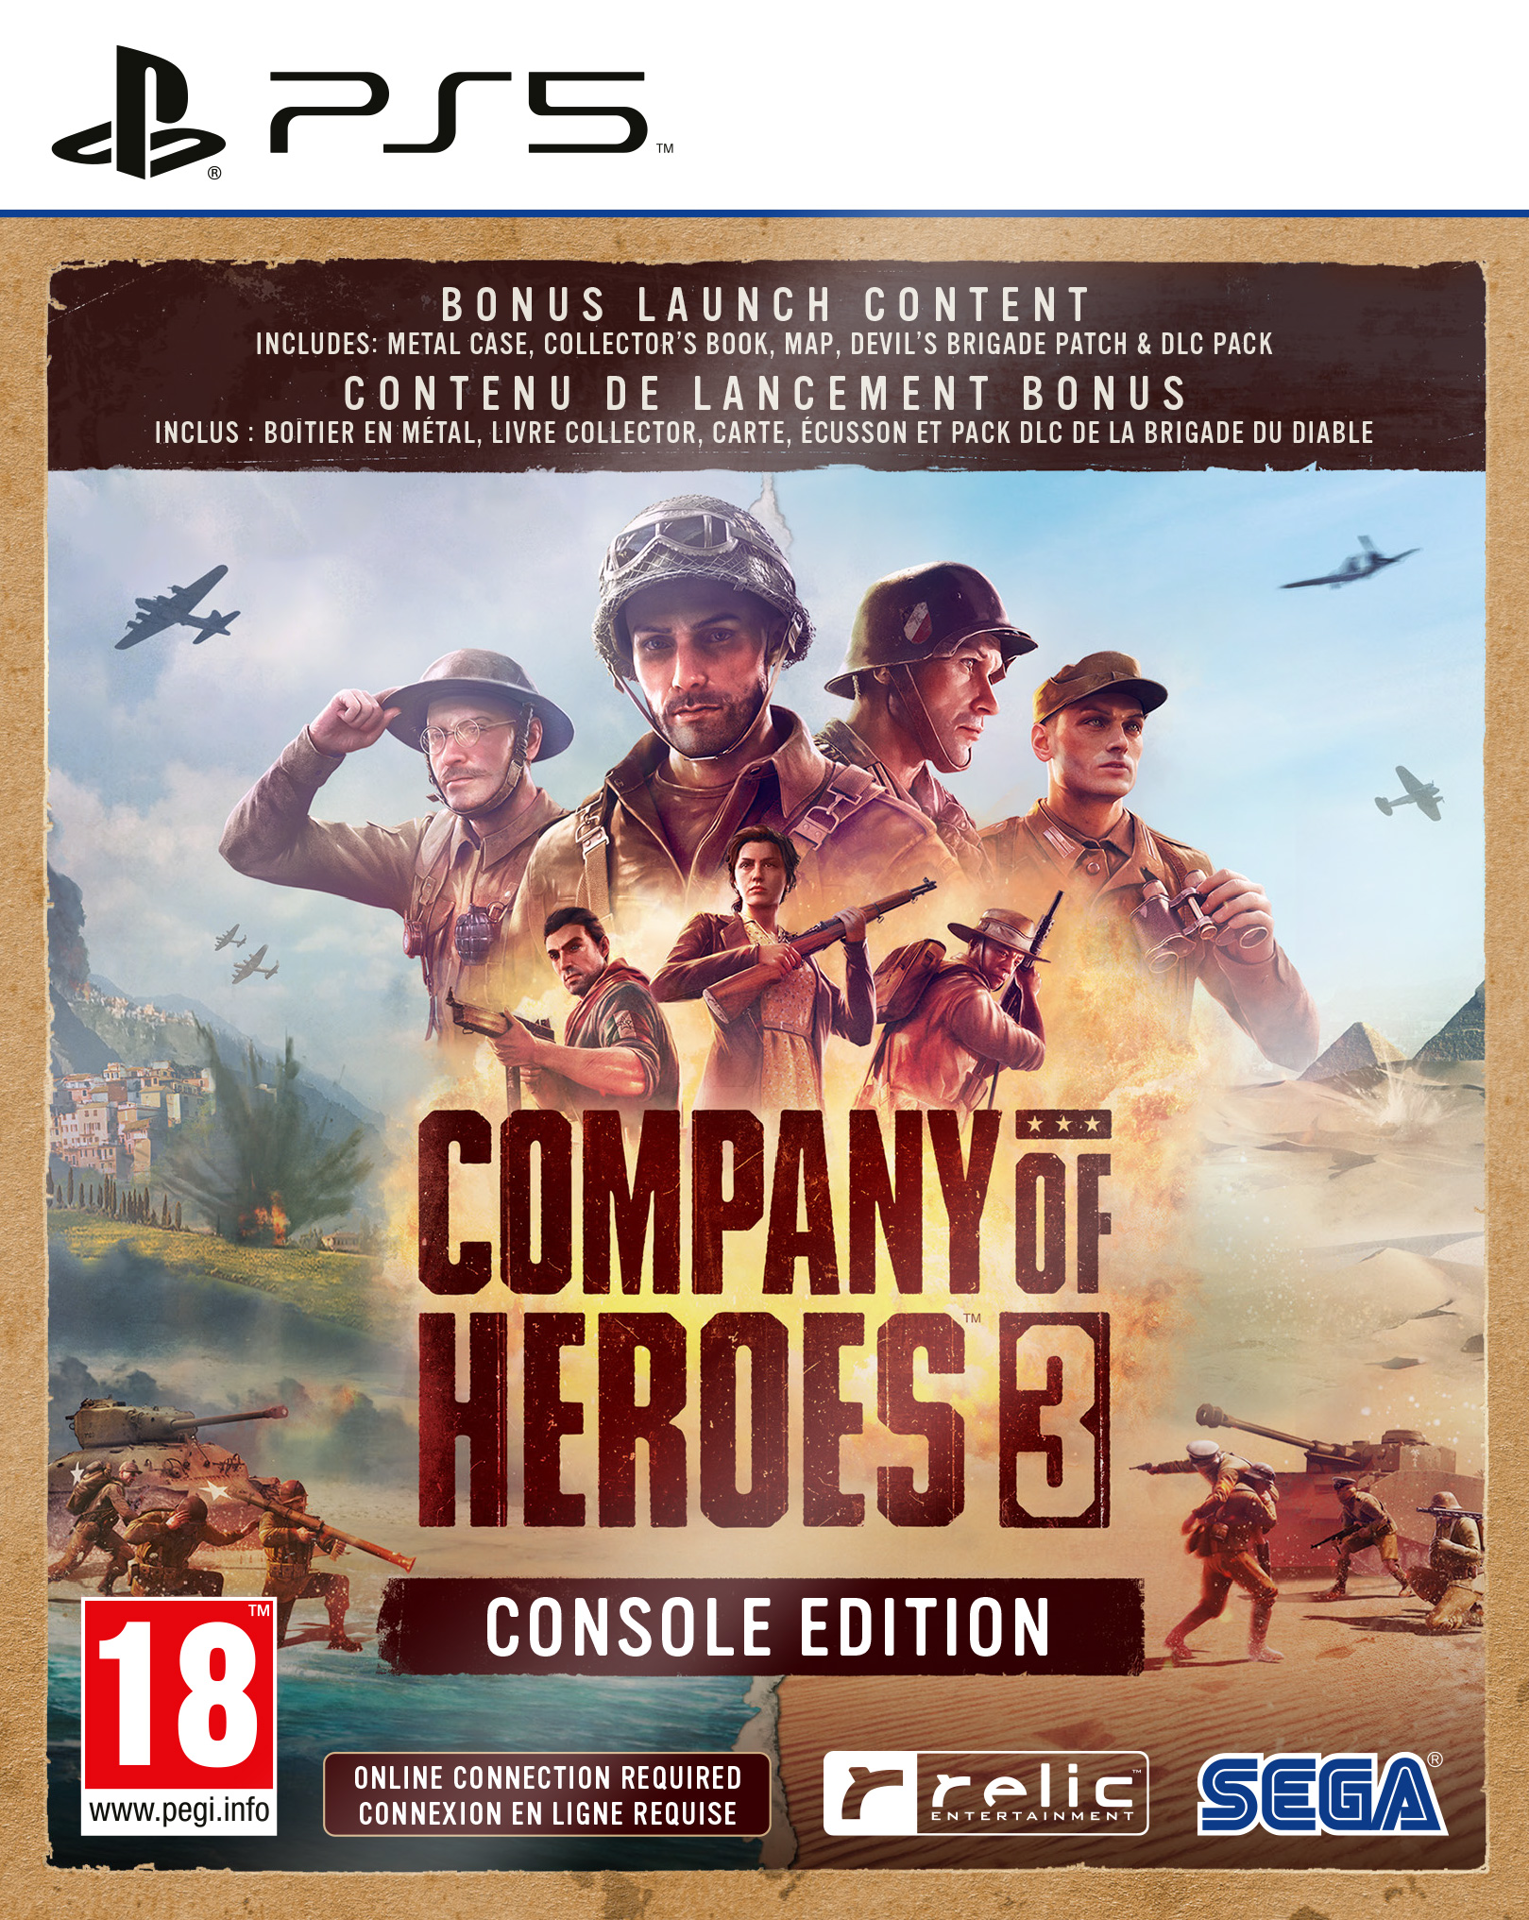 COMPANY OF HEROES 3: CONSOLE EDITION